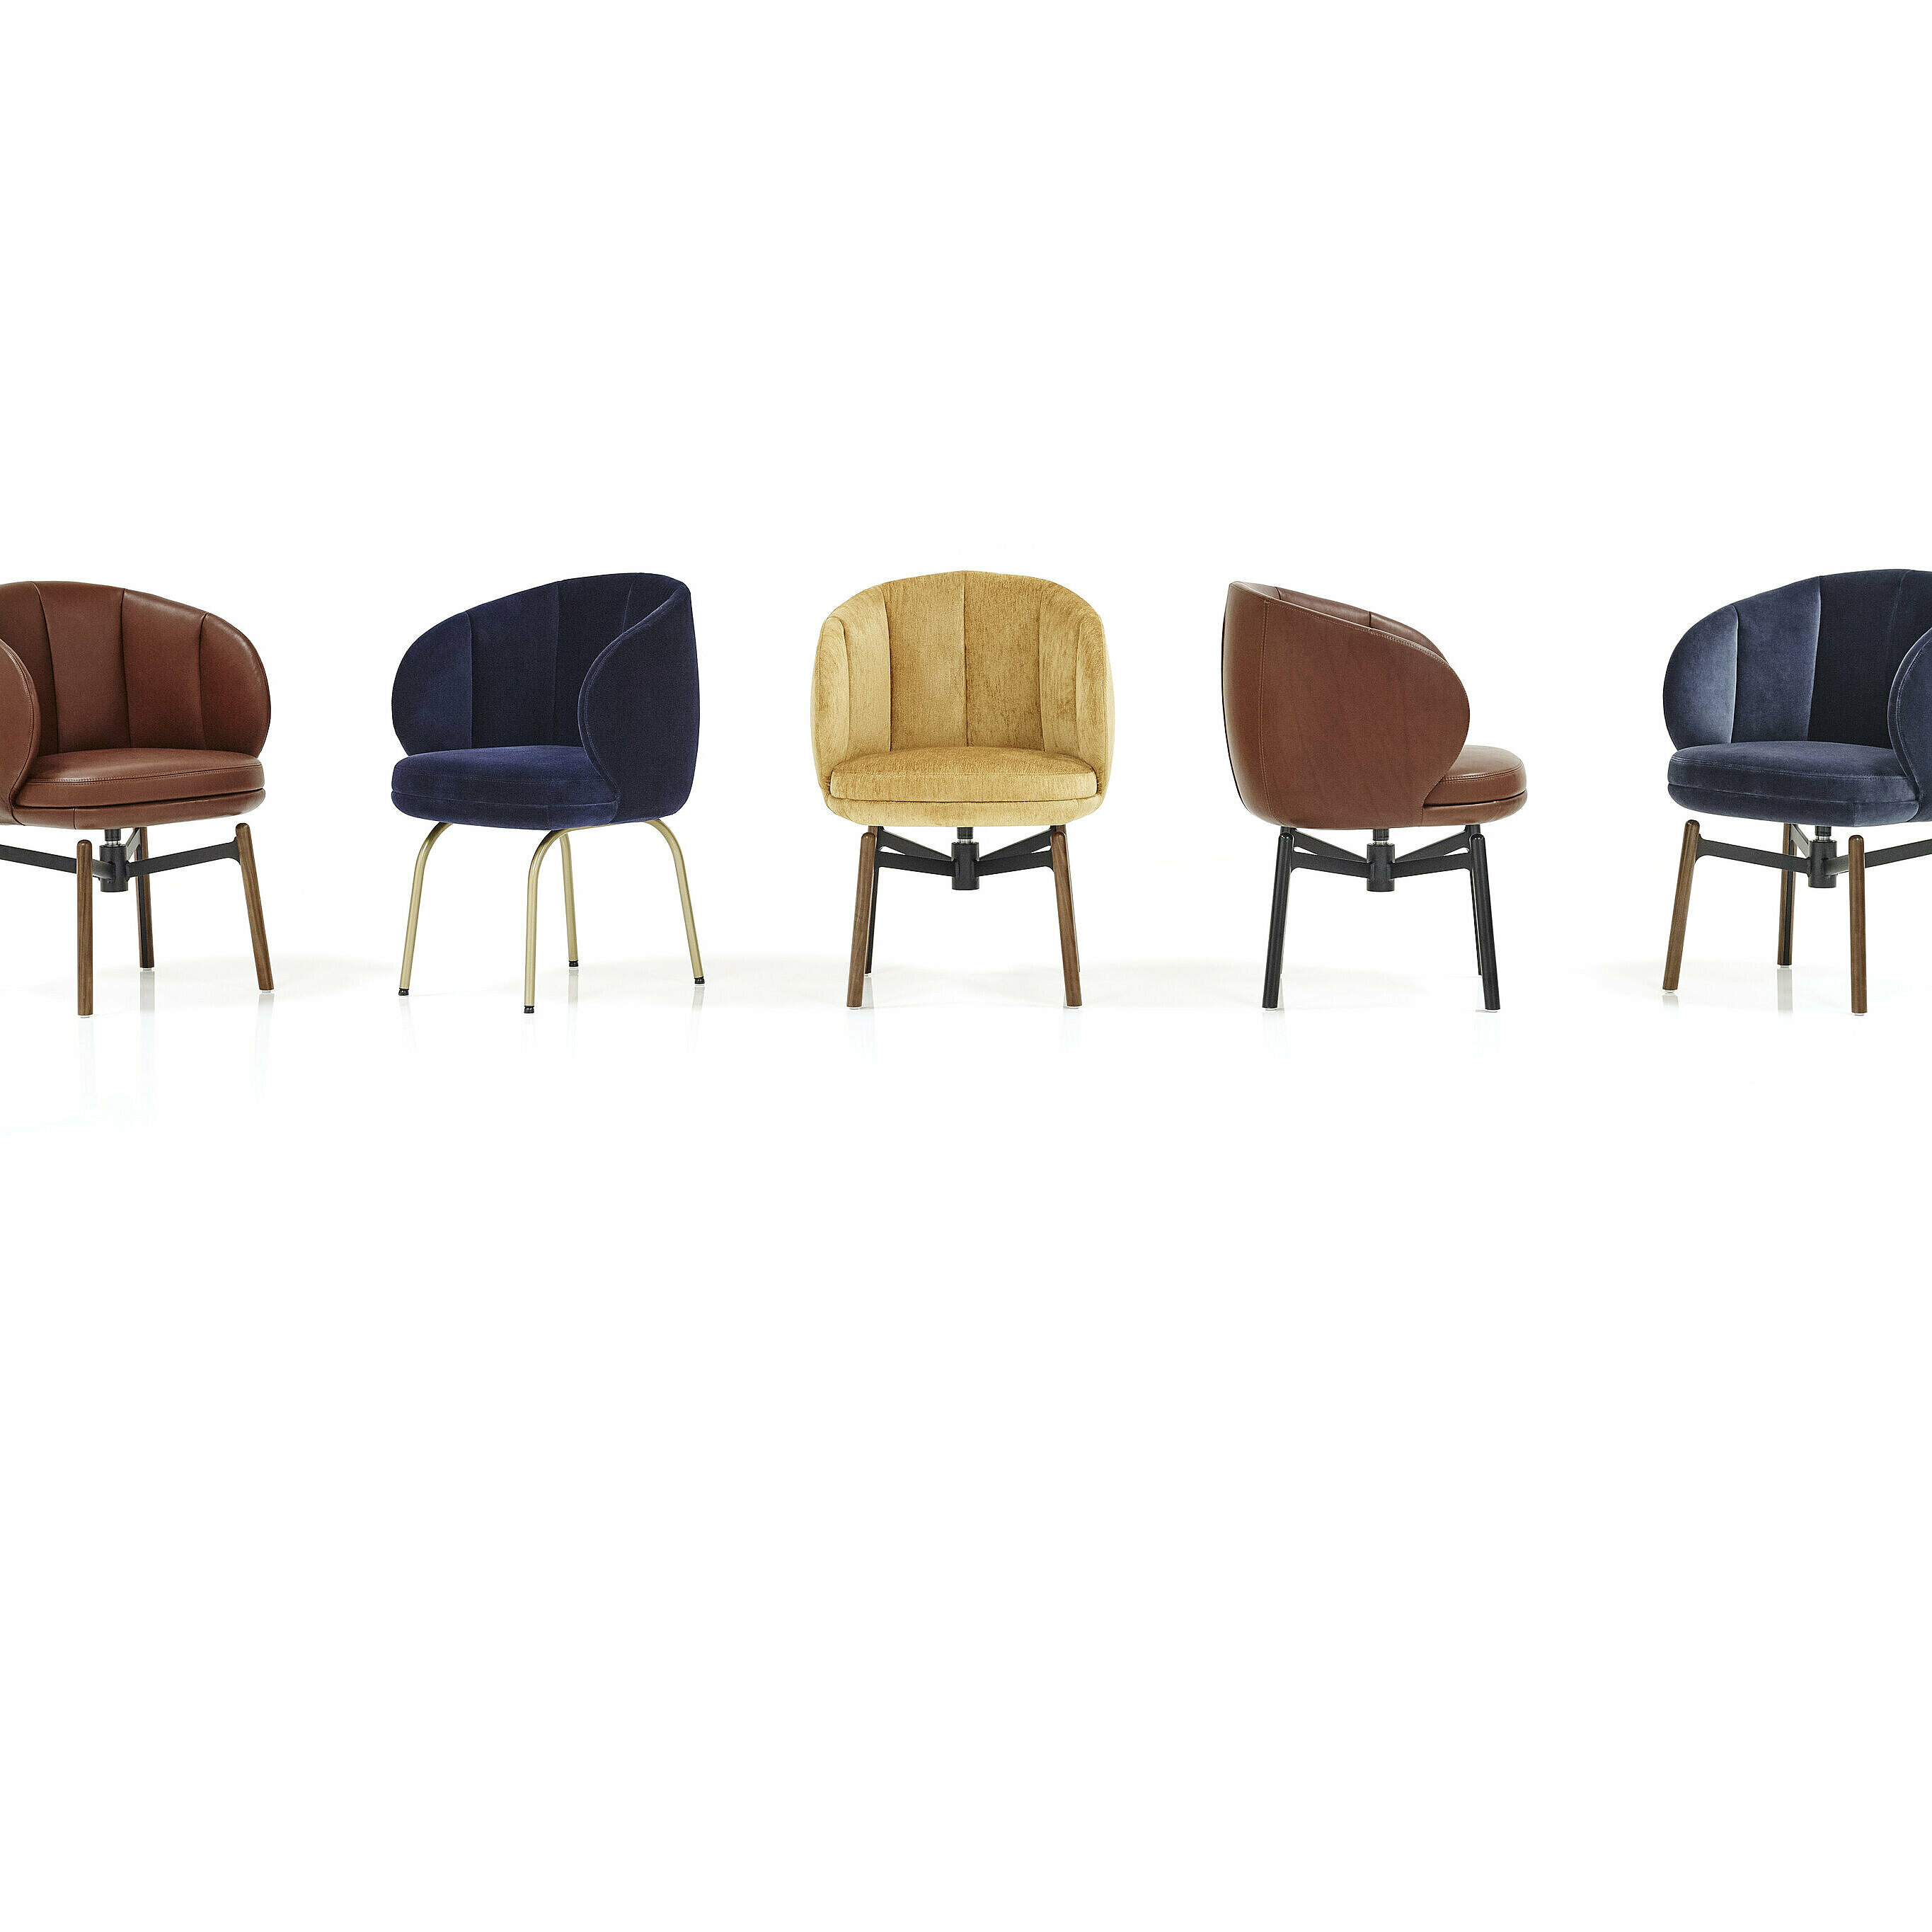 different upholstered Vuelta FD Chairs with 4-legged frame and swivel base with wooden legs